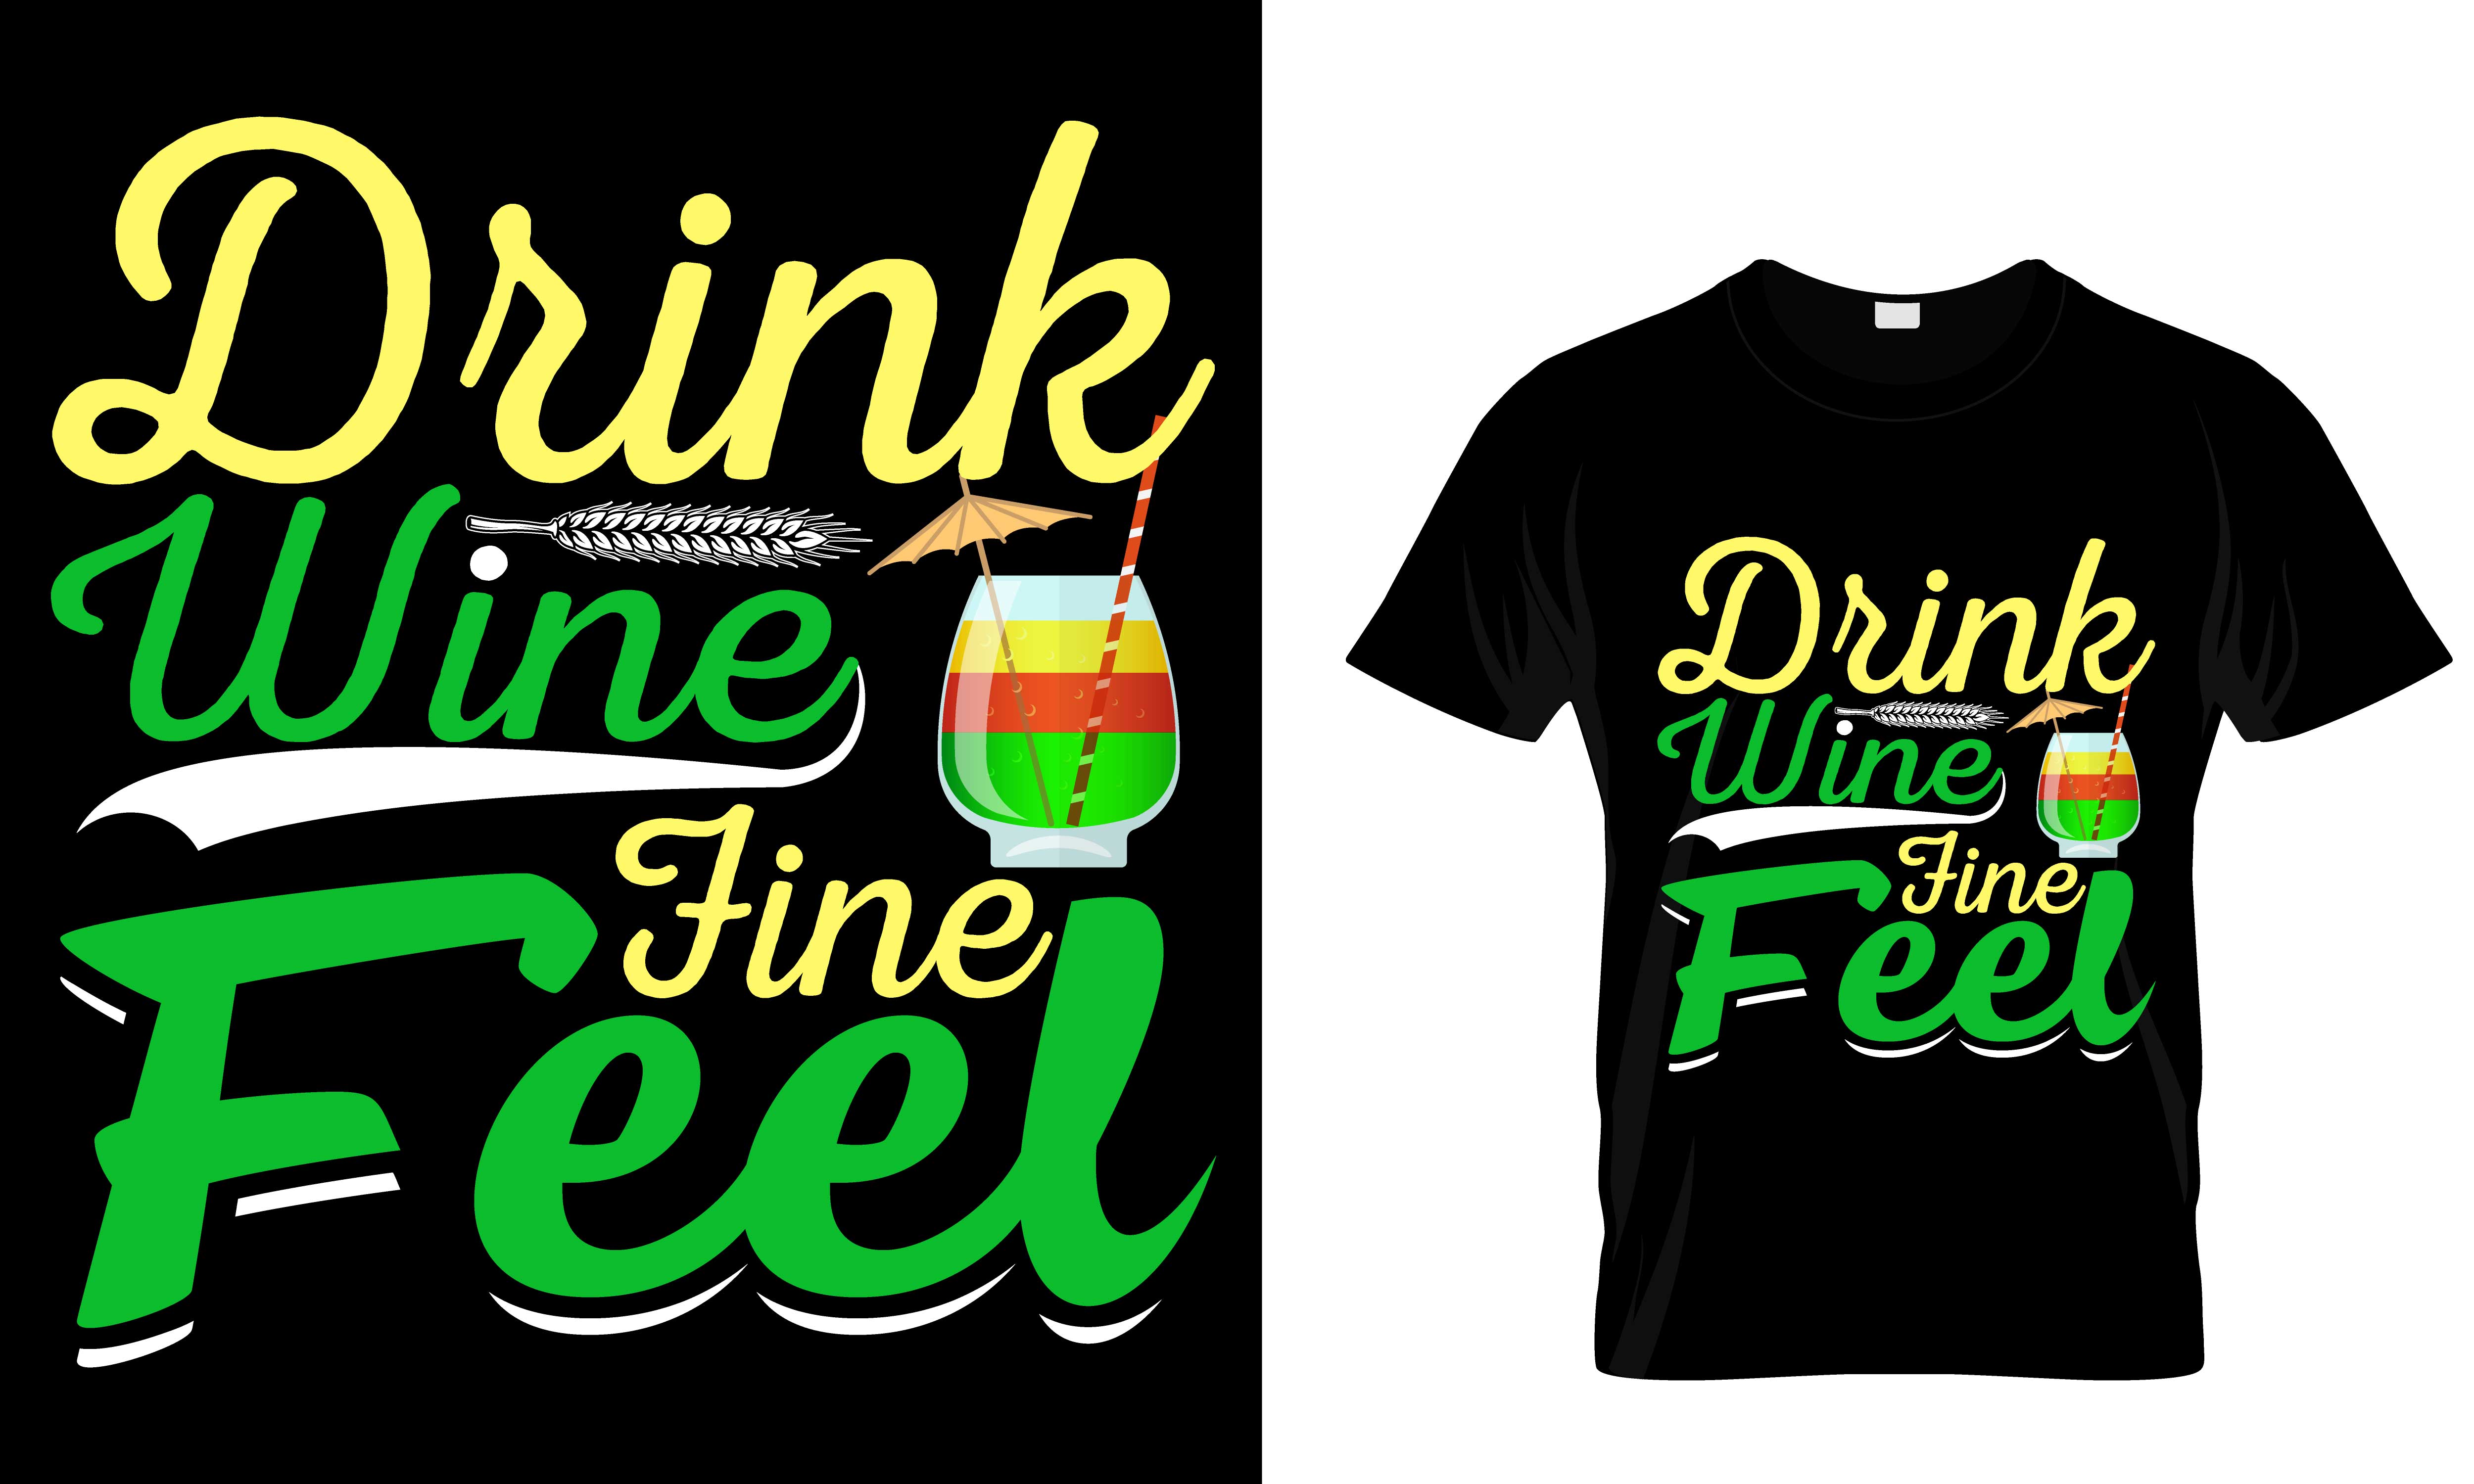 T - shirt that says drink wine and feed.